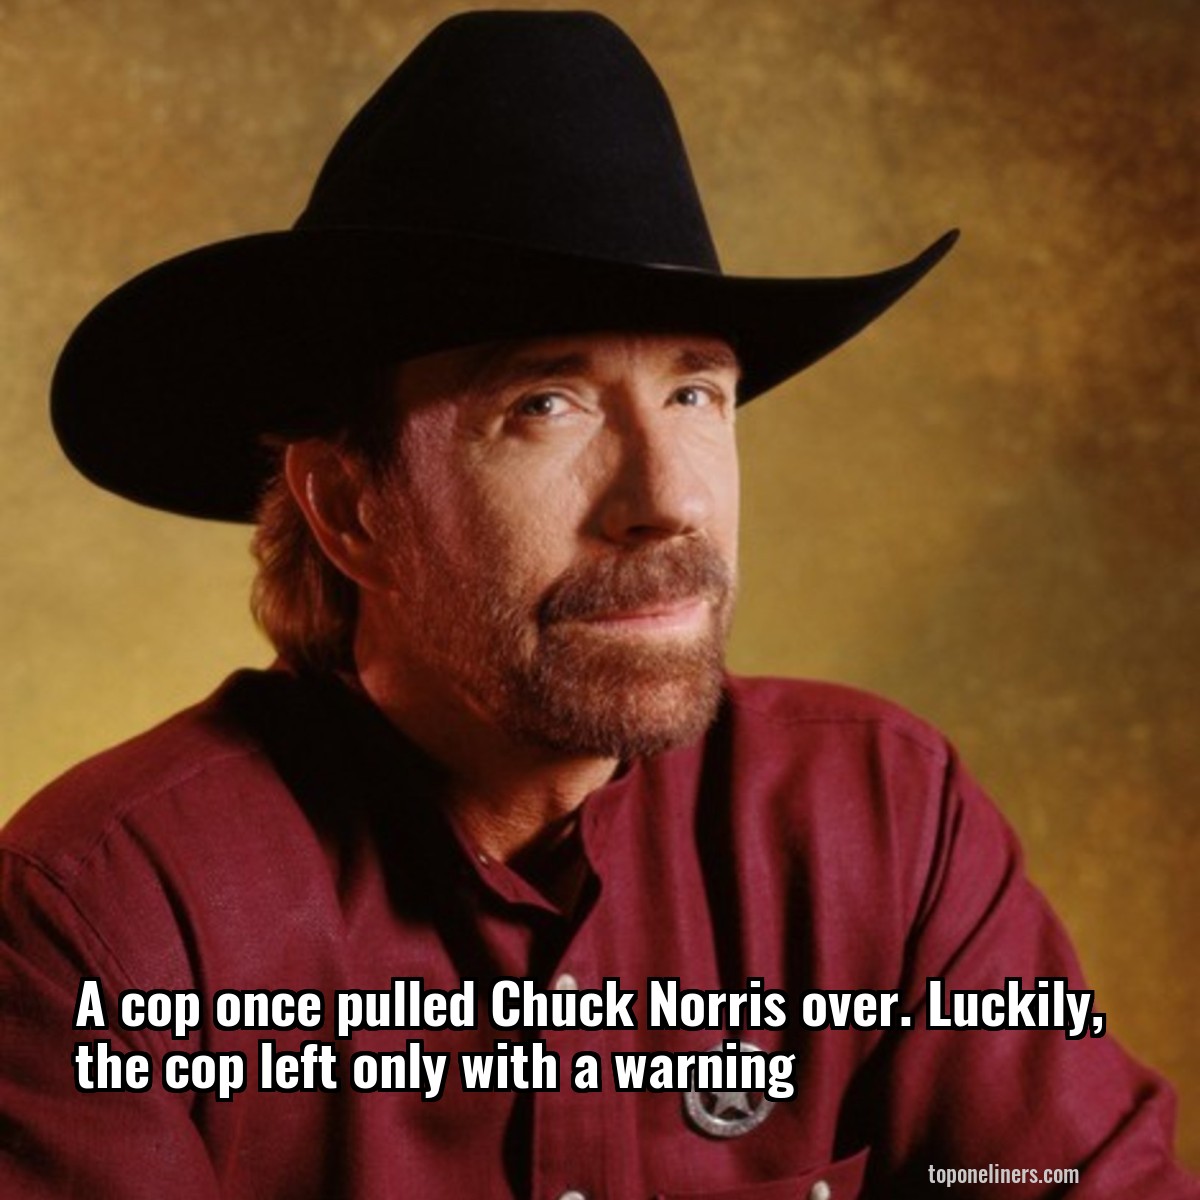 A cop once pulled Chuck Norris over. Luckily, the cop left only with a warning